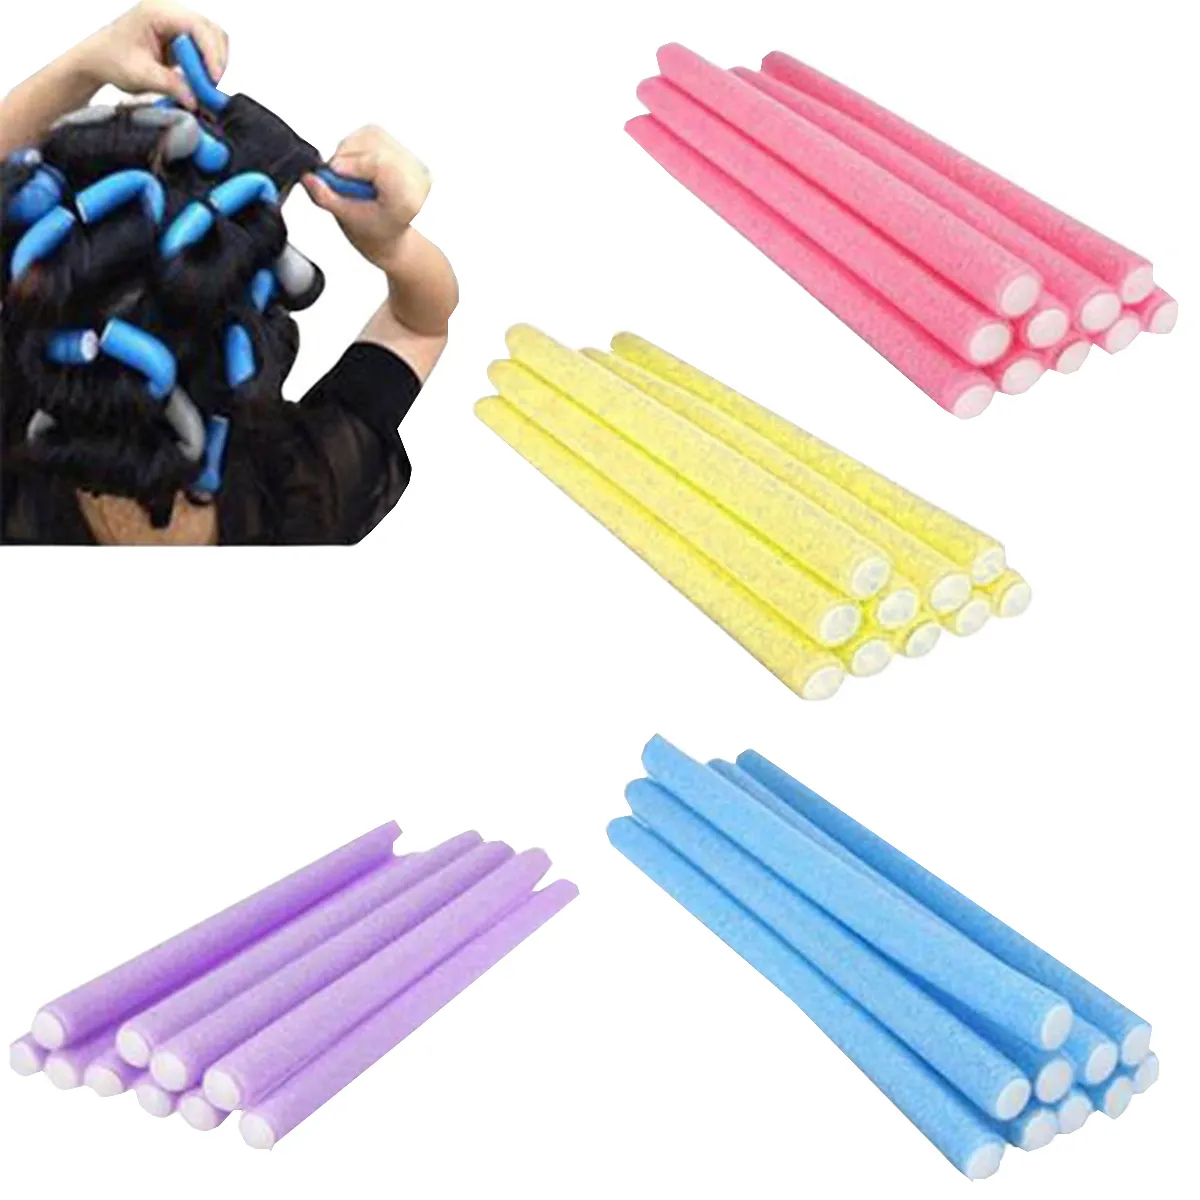 10 Heatless Bendable Hair Rollers No Heat, Soft Curls, Perm Rods, Wave  Formers For Styling From Cn900986868, $8.85